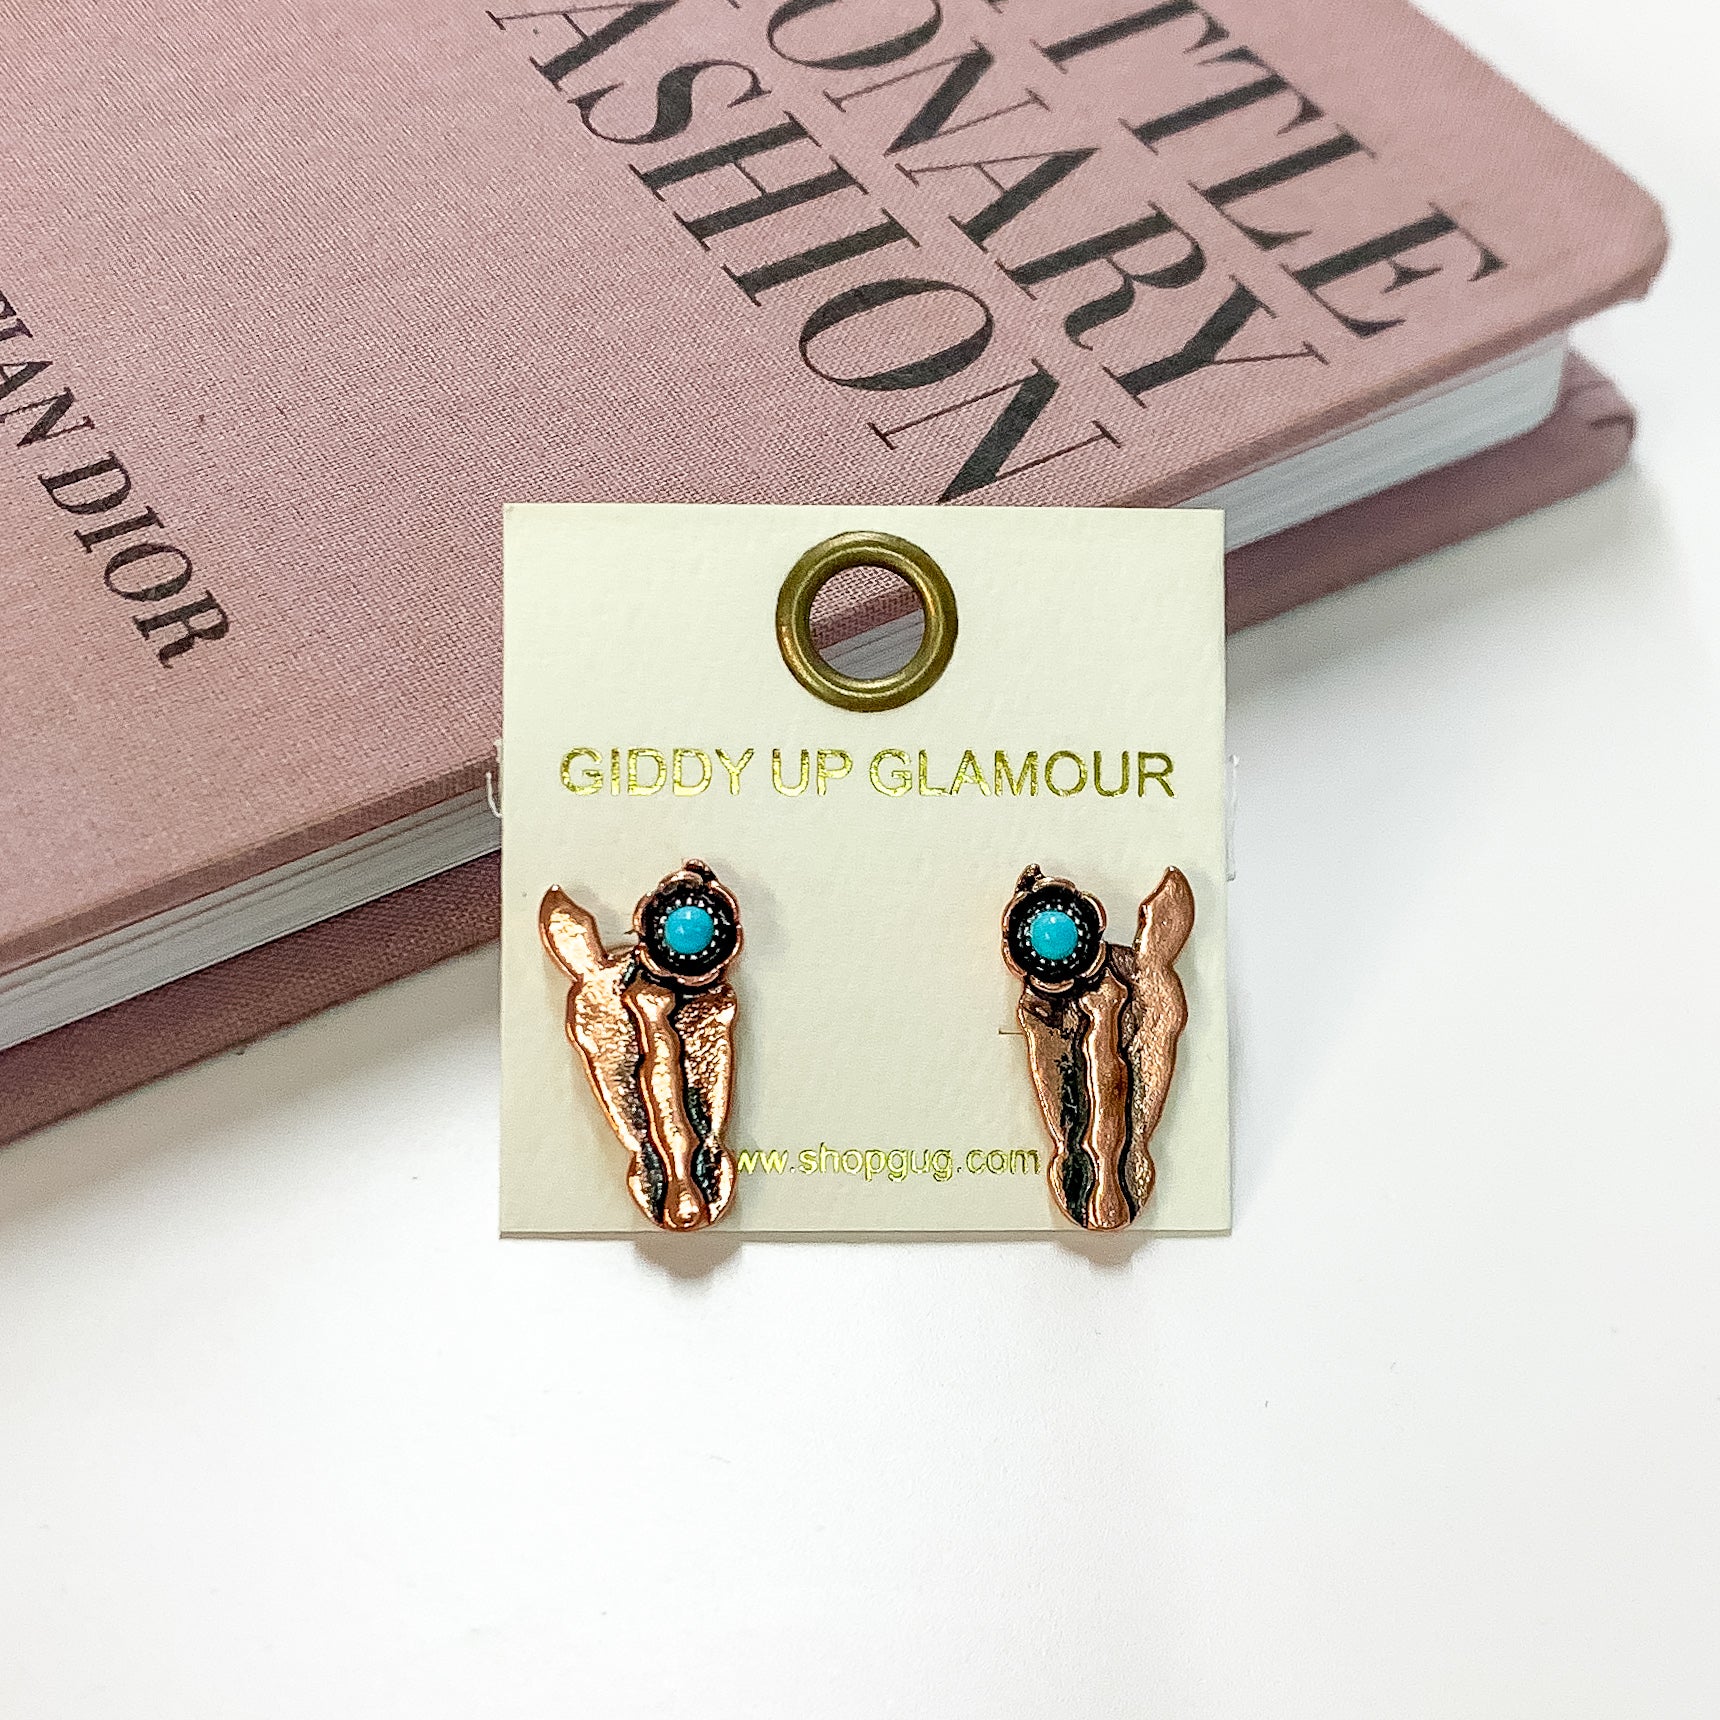 Copper Tone Horse Head Stud Earrings with Turquoise Blue Stones - Giddy Up Glamour Boutique